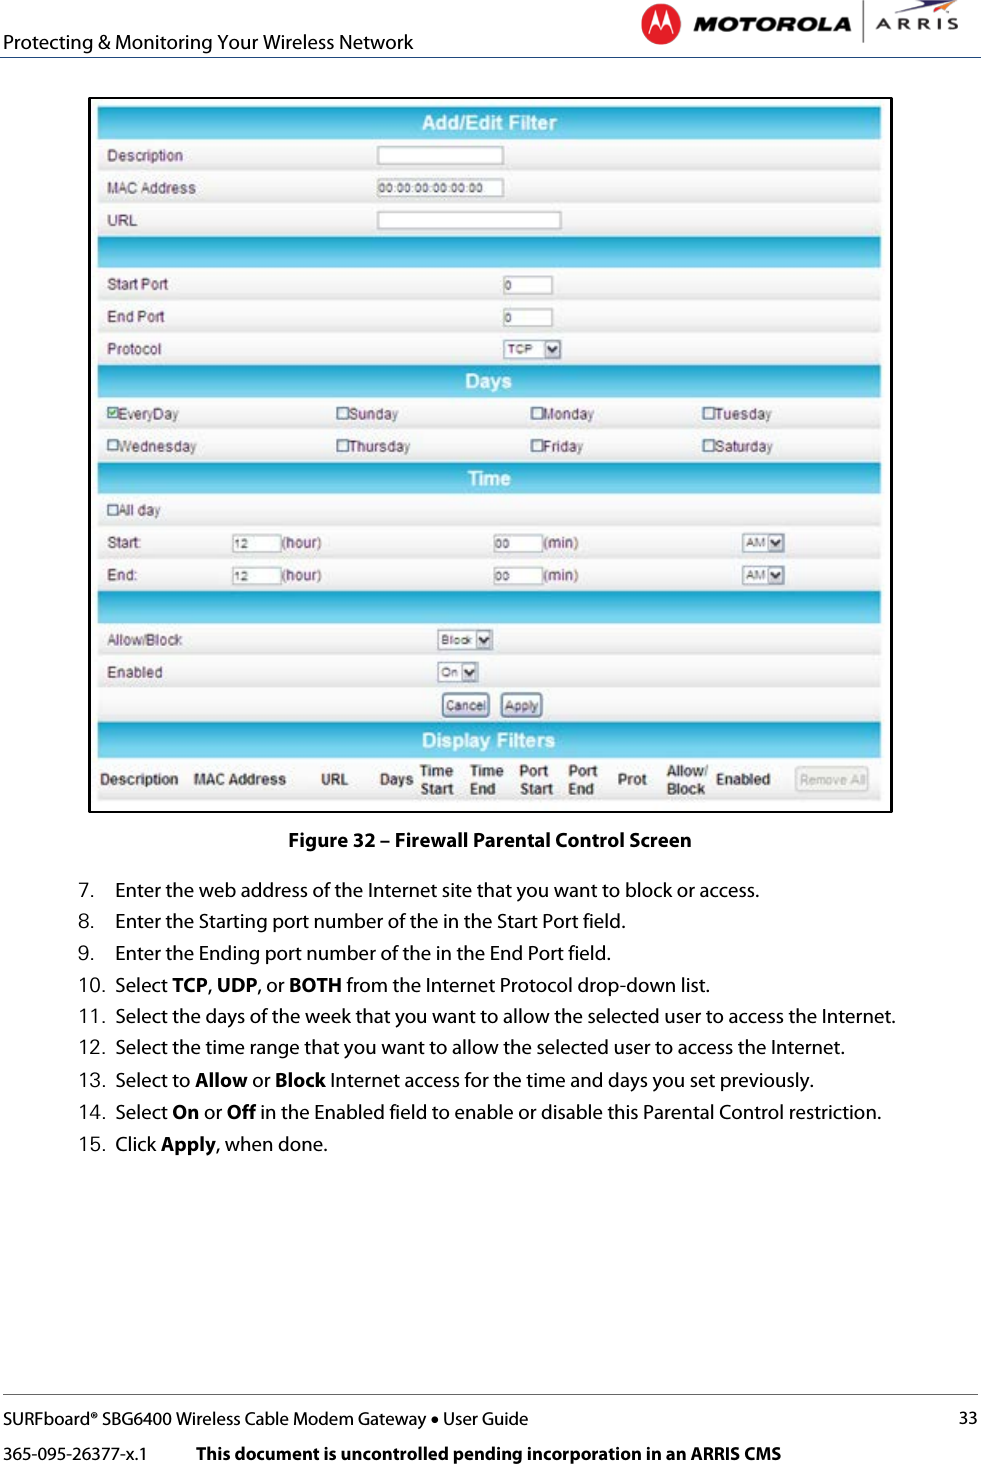 Protecting &amp; Monitoring Your Wireless Network   SURFboard® SBG6400 Wireless Cable Modem Gateway • User Guide 33 365-095-26377-x.1            This document is uncontrolled pending incorporation in an ARRIS CMS   Figure 32 – Firewall Parental Control Screen 7. Enter the web address of the Internet site that you want to block or access. 8. Enter the Starting port number of the in the Start Port field. 9. Enter the Ending port number of the in the End Port field. 10. Select TCP, UDP, or BOTH from the Internet Protocol drop-down list.  11. Select the days of the week that you want to allow the selected user to access the Internet. 12. Select the time range that you want to allow the selected user to access the Internet. 13. Select to Allow or Block Internet access for the time and days you set previously. 14. Select On or Off in the Enabled field to enable or disable this Parental Control restriction. 15. Click Apply, when done. 